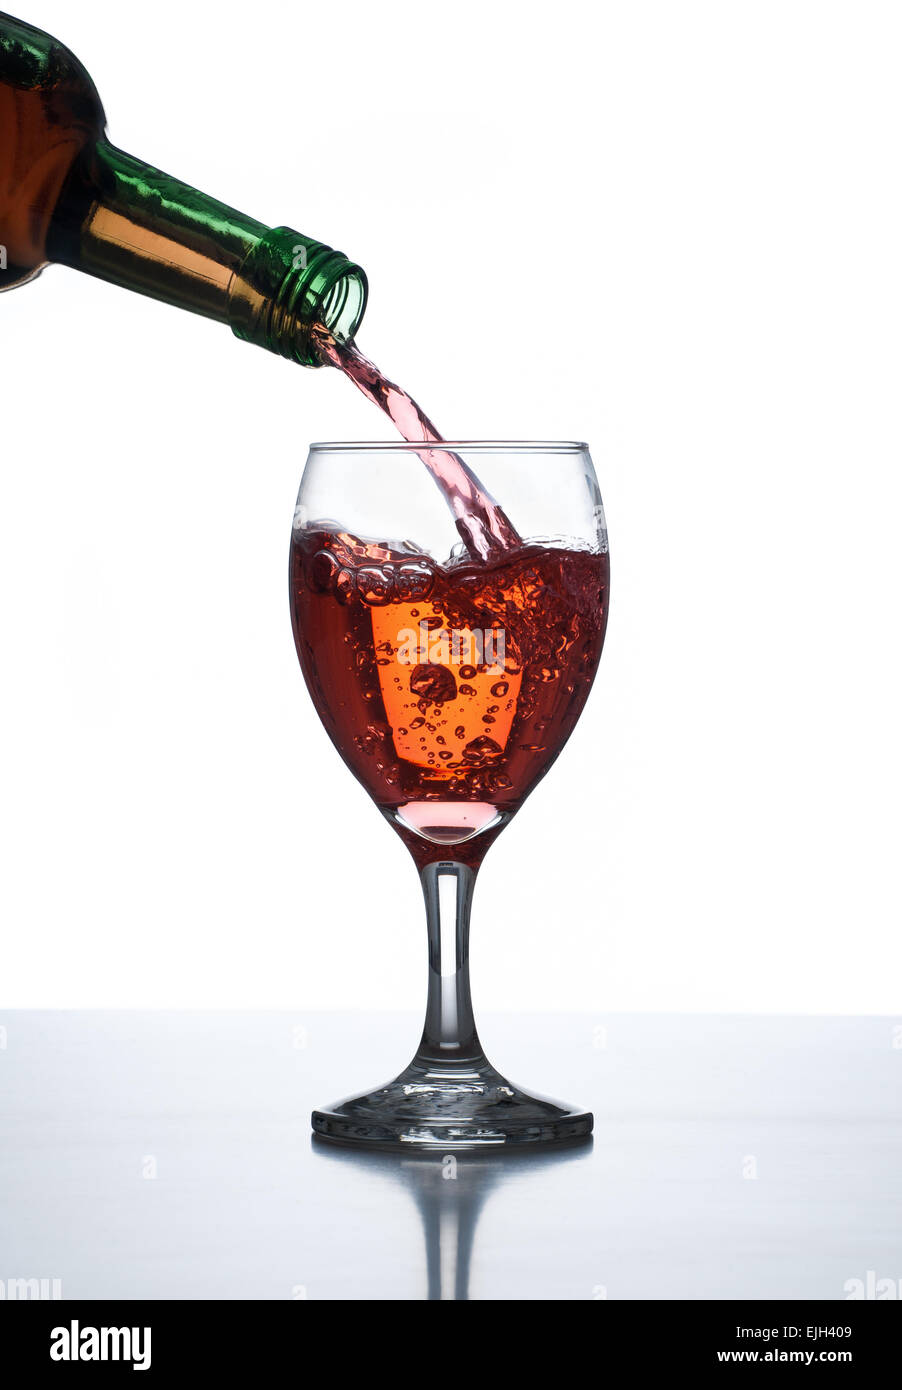 Liquor pouring into wine glass on reflective table with white background. Stock Photo